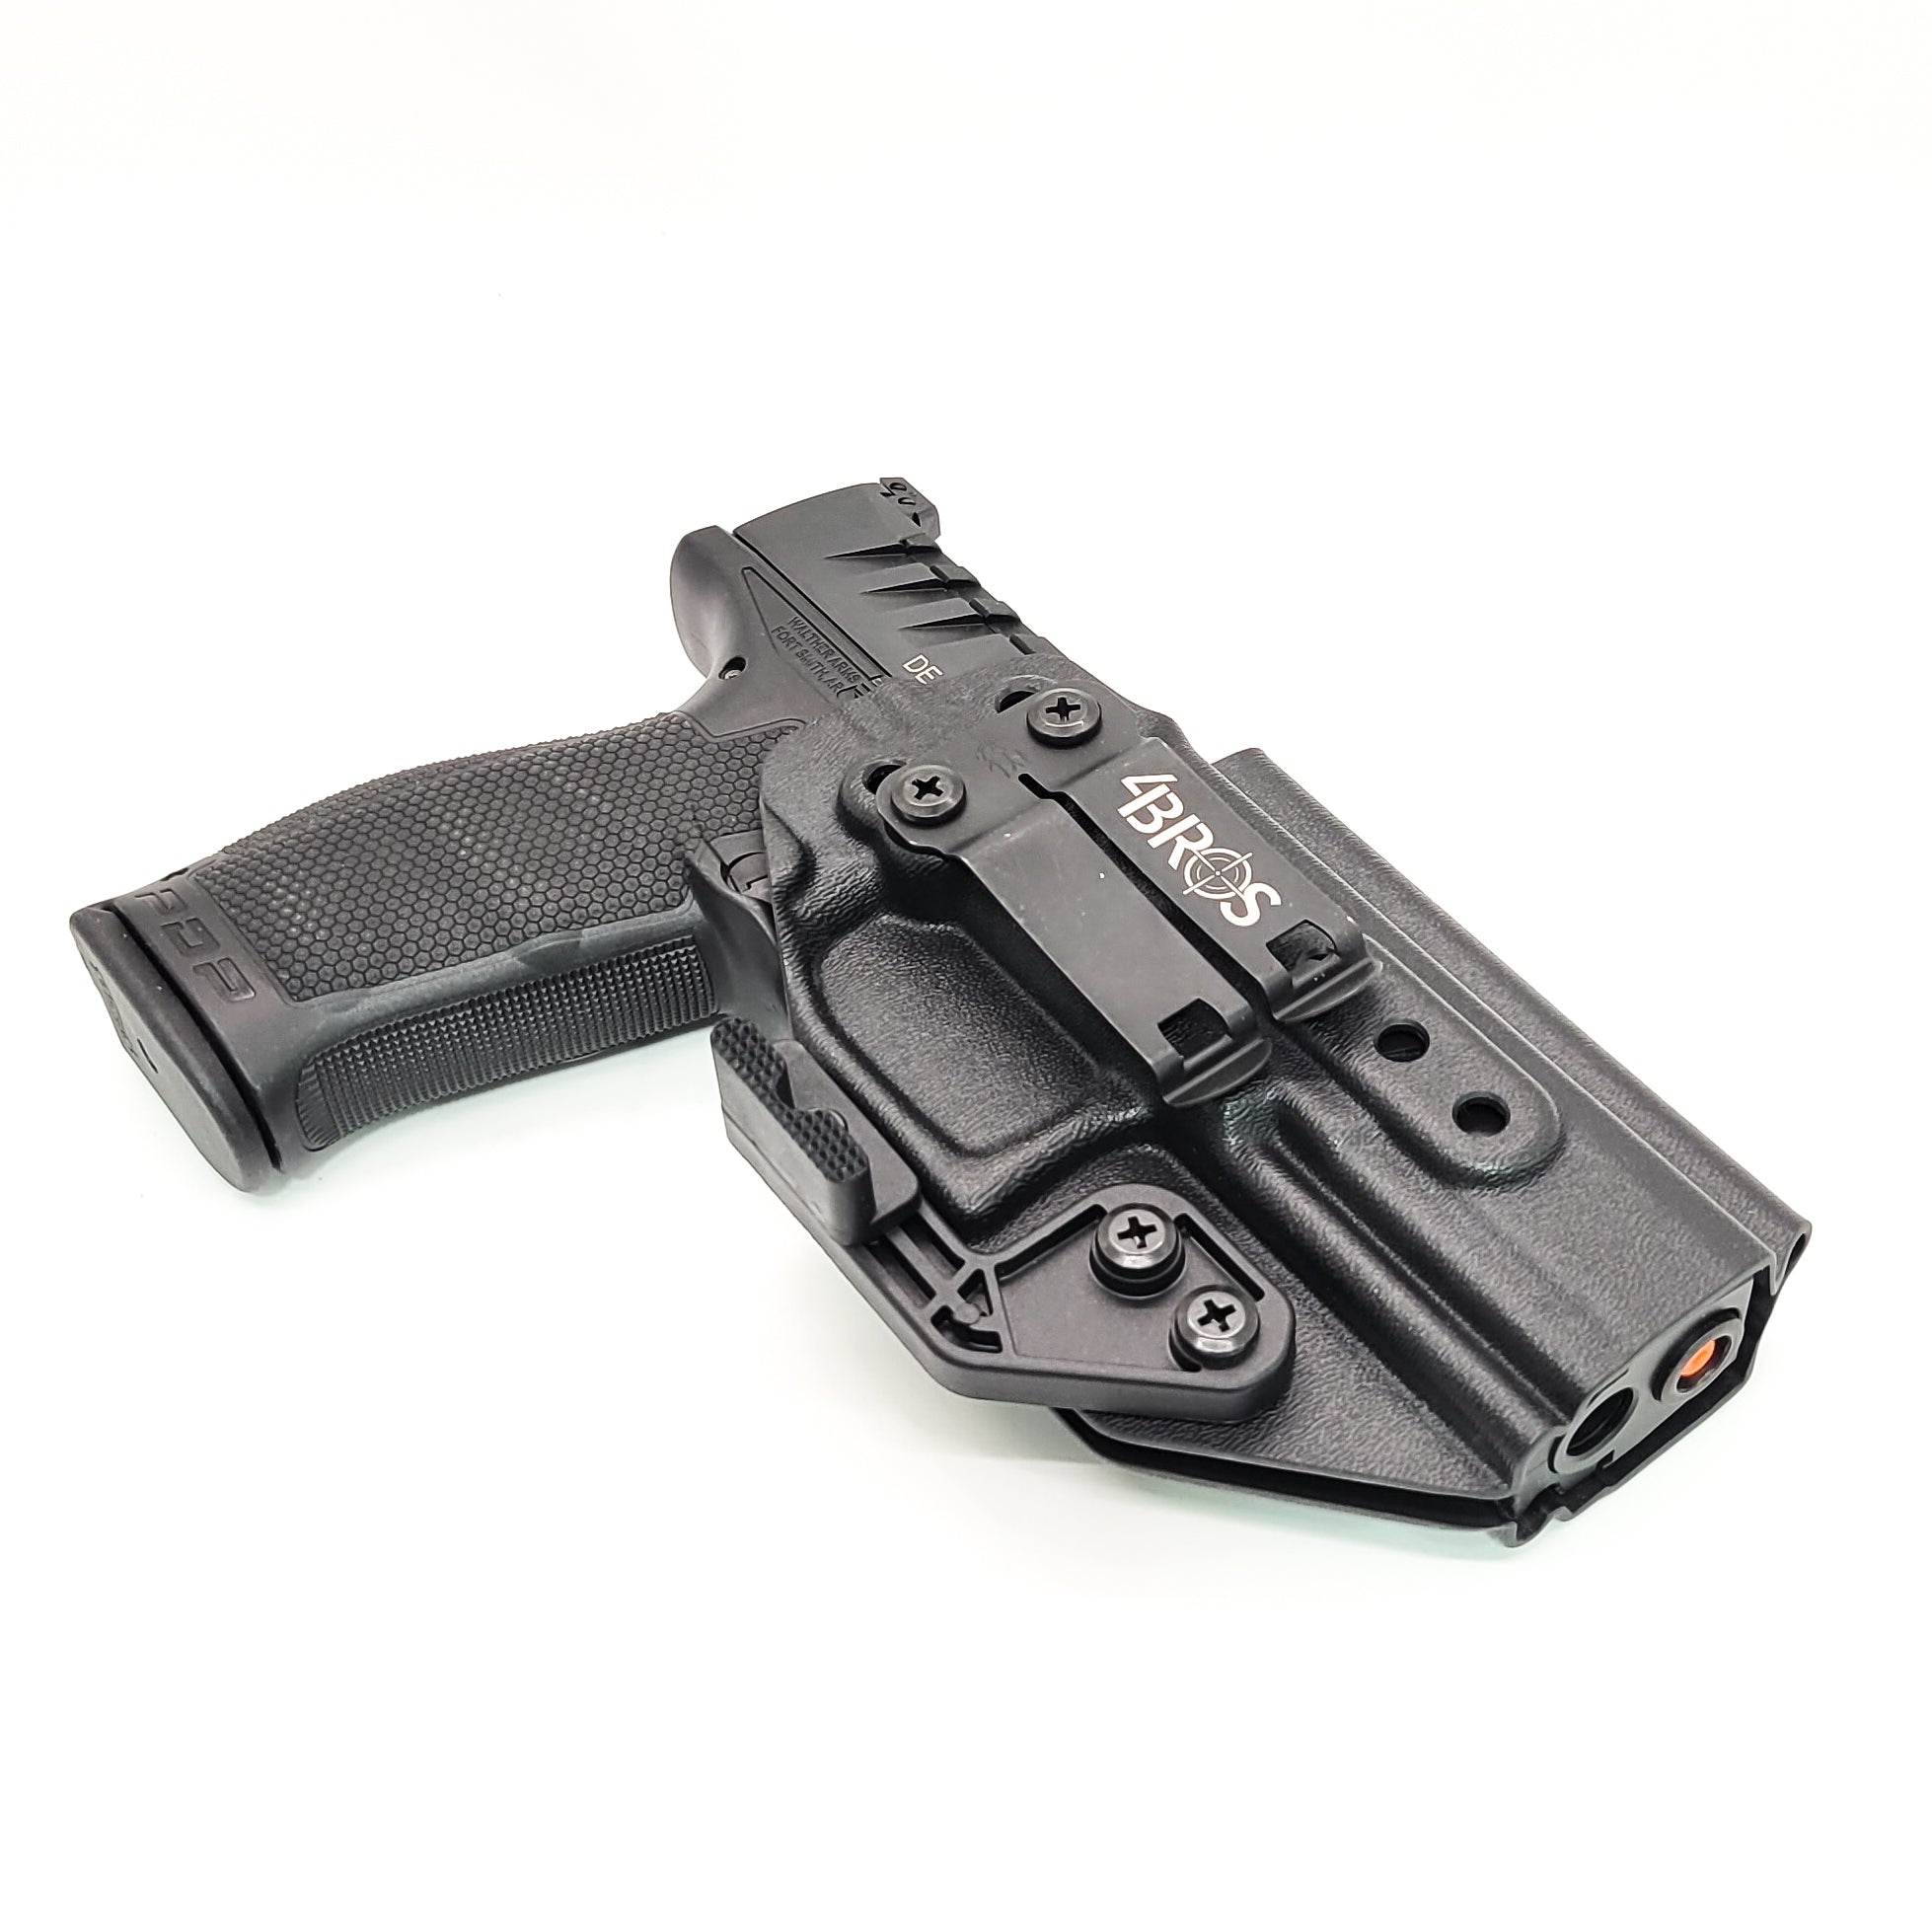 Inside Waistband IWB Kydex Holster designed to fit the Walther PDP Compact pistol. Holster profile is cut to allow red dot sights to be mounted on the pistol.  This holster will fit the Full Size 4.5", Full Size 4" & Compact. Full sweat guard, adjustable retention and open muzzle for threaded barrels and compensators.